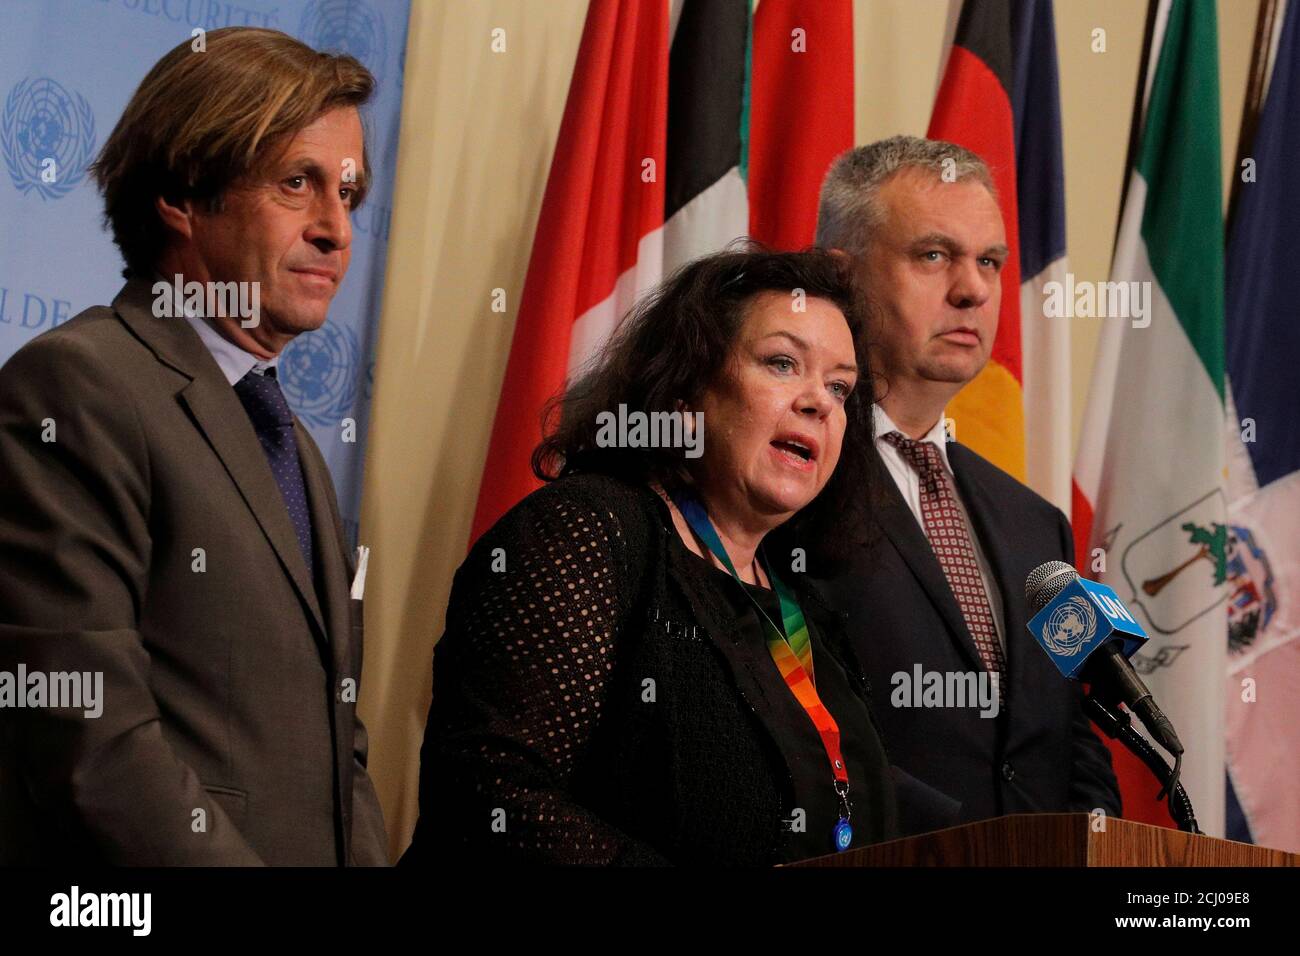 Nicolas de Riviere, French Ambassador to the United Nations, Karen Pierce, the United Kingdom's Ambassador to the UN, and Jurgen Schulz, German Deputy Ambassador to the UN, deliver a statement after a U.N. Security Council meeting, on North Korea's latest missile launches, at the United Nations headquarters in New York, U.S.,  August 1, 2019. REUTERS/Brendan McDermid Stock Photo